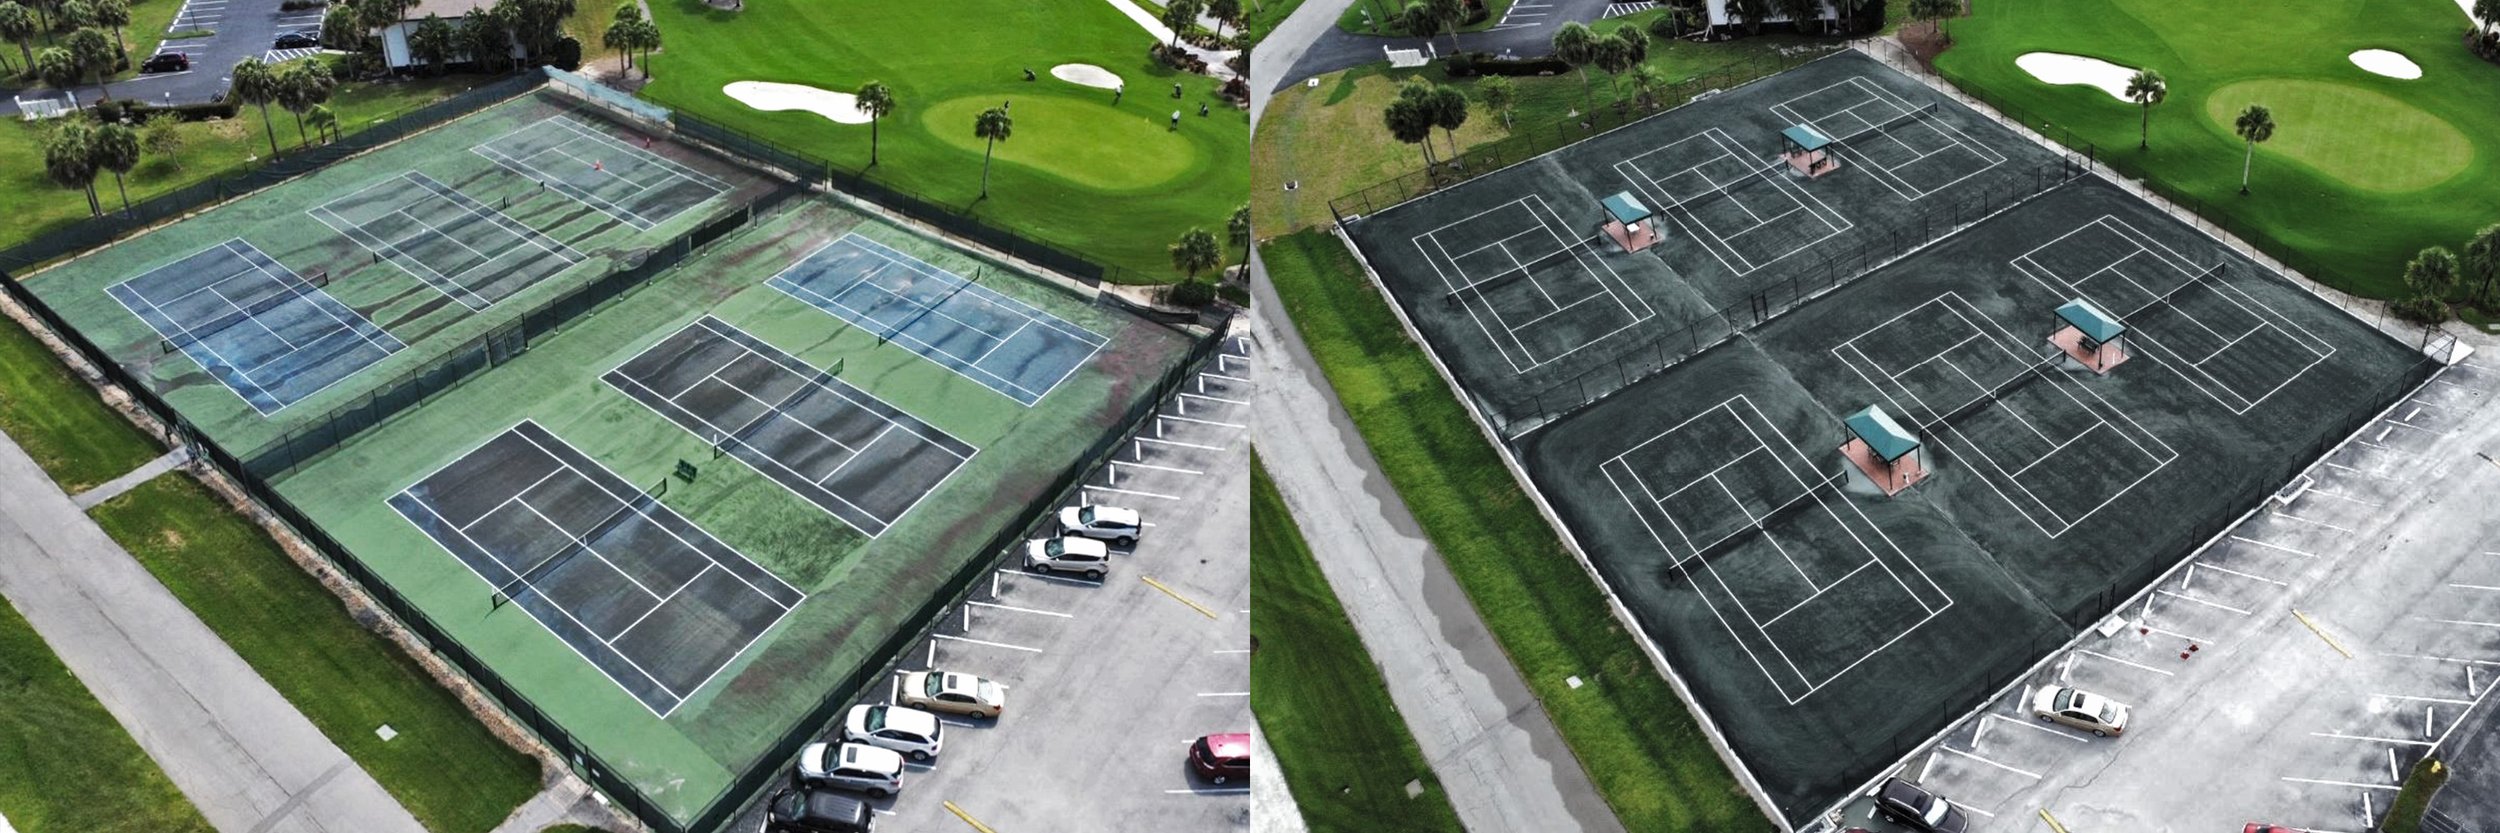 TheGlades-Naples - Tennis Two Stages.jpg